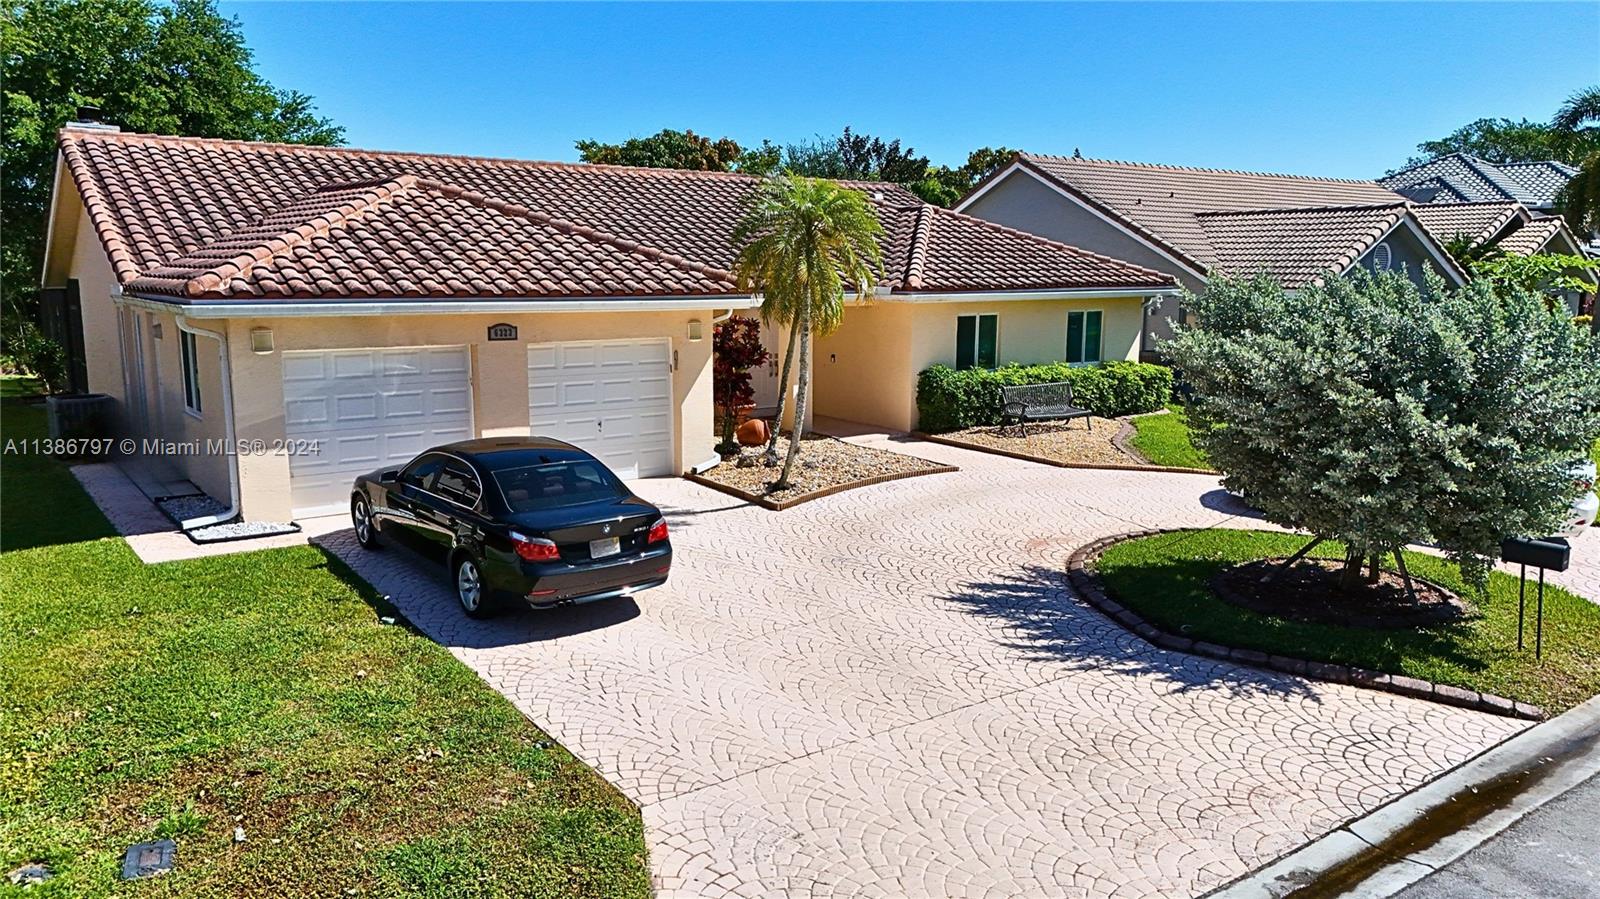 Address Not Disclosed, Coral Springs, Broward County, Florida - 5 Bedrooms  
3 Bathrooms - 